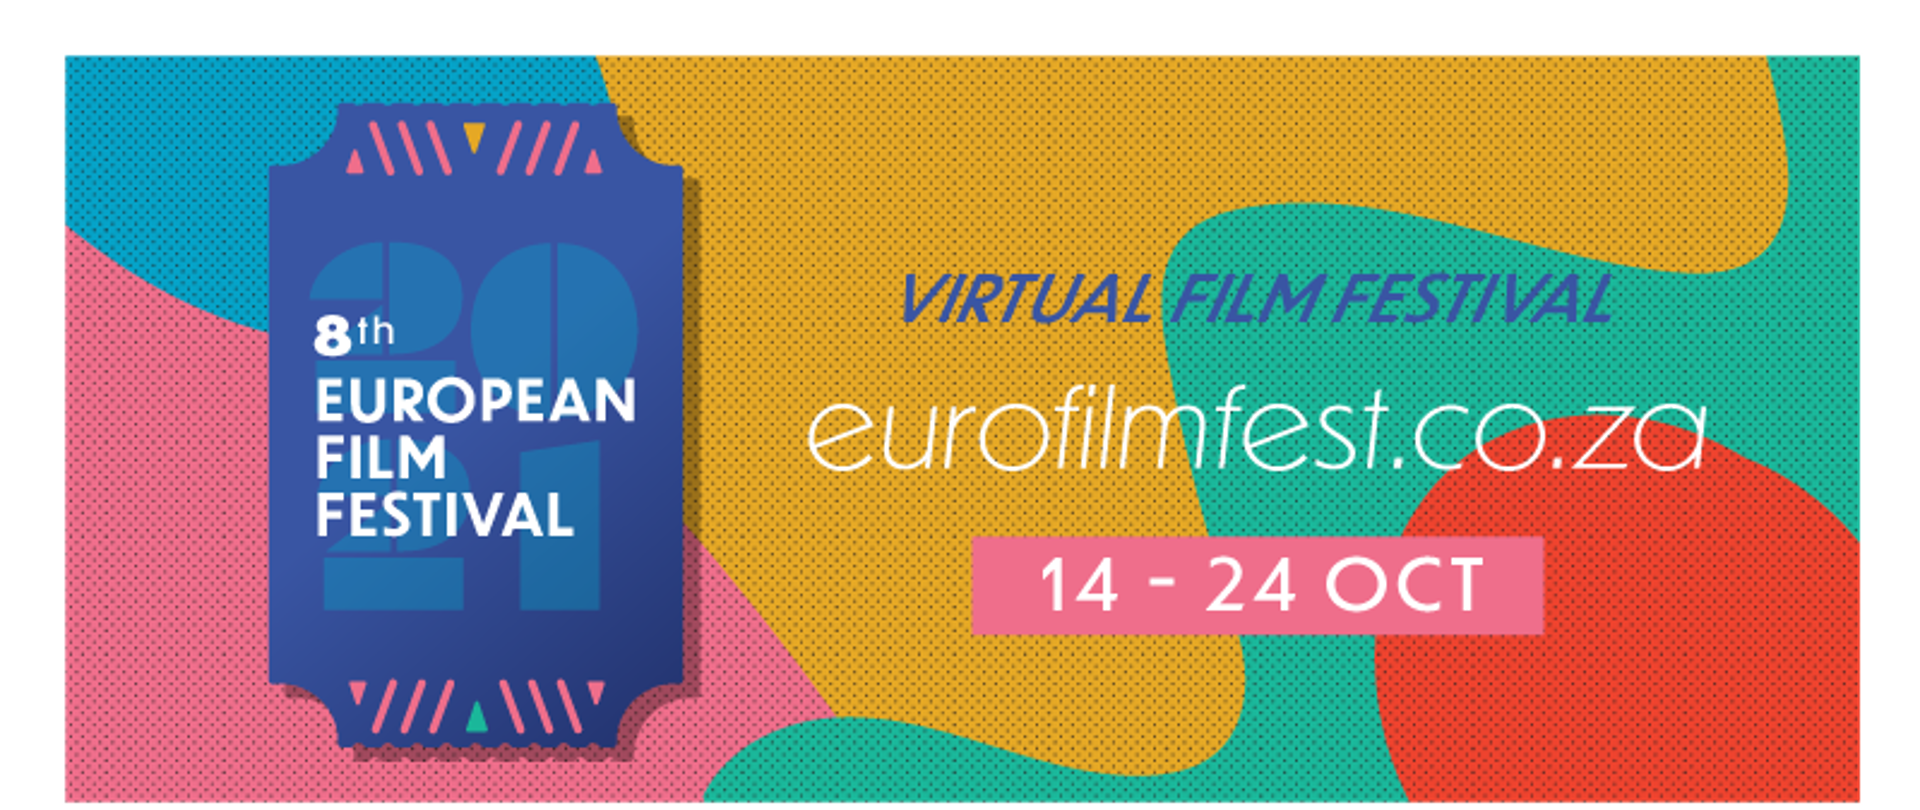 European Film Festival 2021: virtual and free of charge